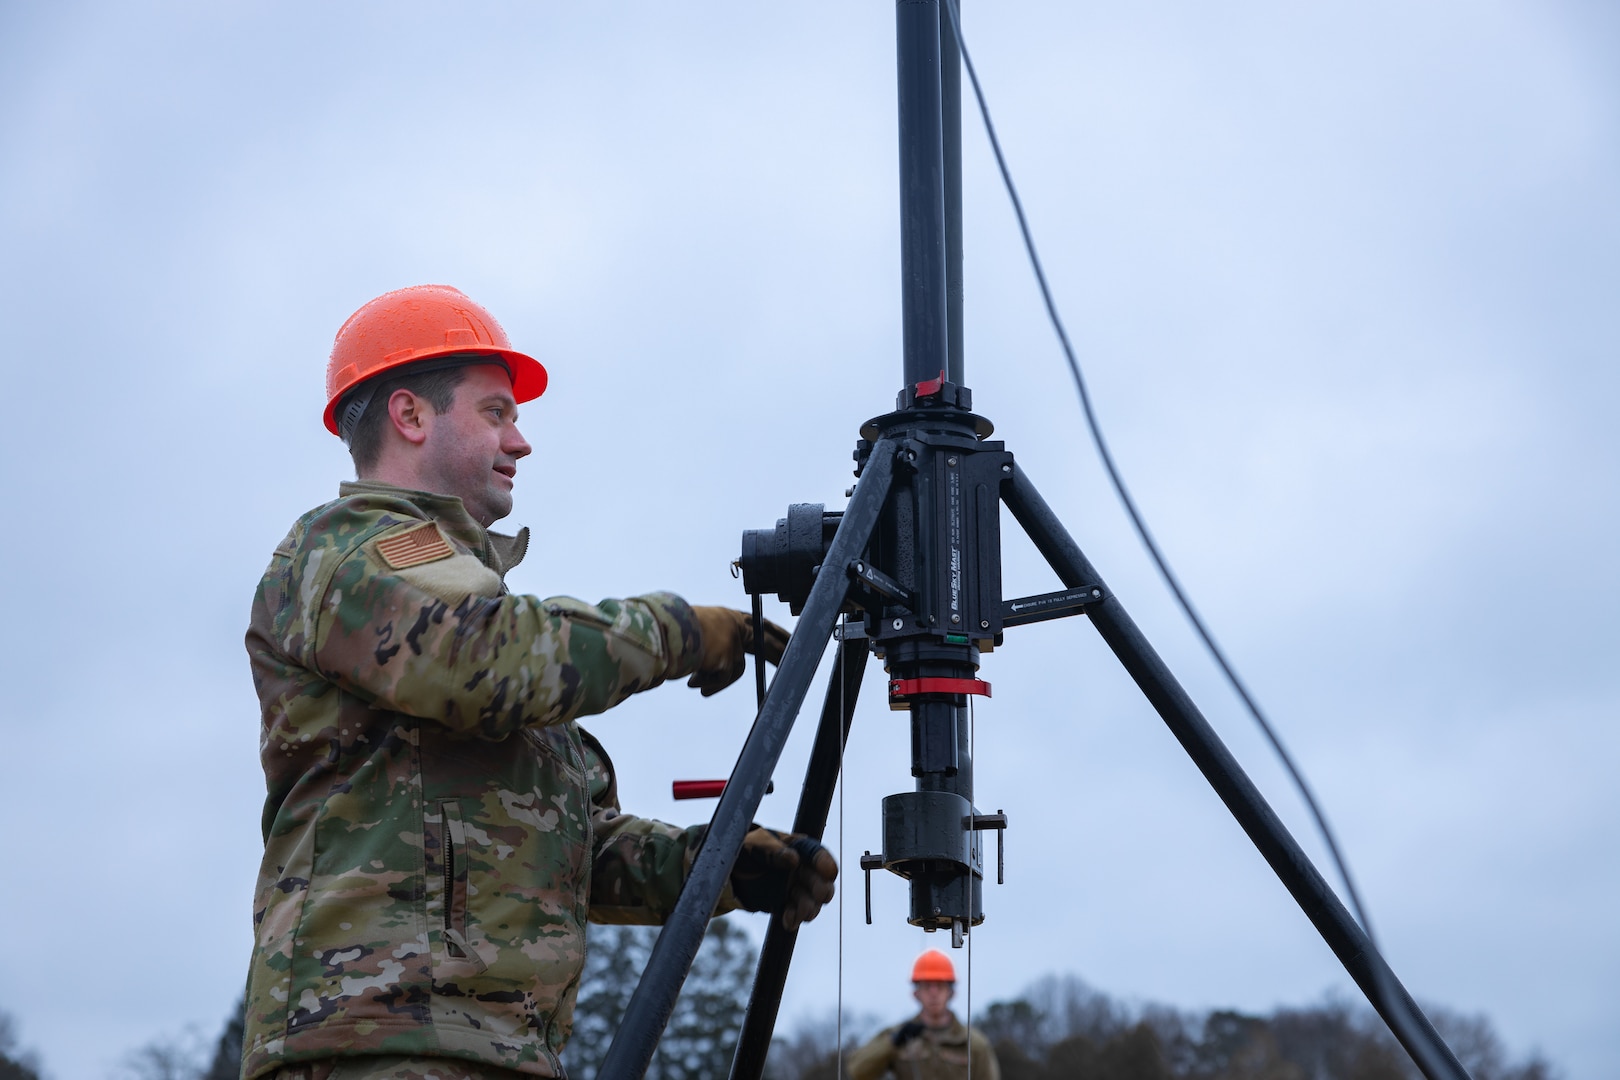 Connecticut Air National Guard Master Sgt. Jonathan Wolff, an expeditionary warfighting communications Airman assigned to the 103rd Air Control Squadron, or 103rd ACS, cranks the handle of an antenna mast, part of the Tactical Operations Center - Light, or TOC-L, at Camp Nett, Niantic, Connecticut, March 5, 2024. Airmen from the 103rd ACS are testing the TOC-L system for the U.S. Air Force.